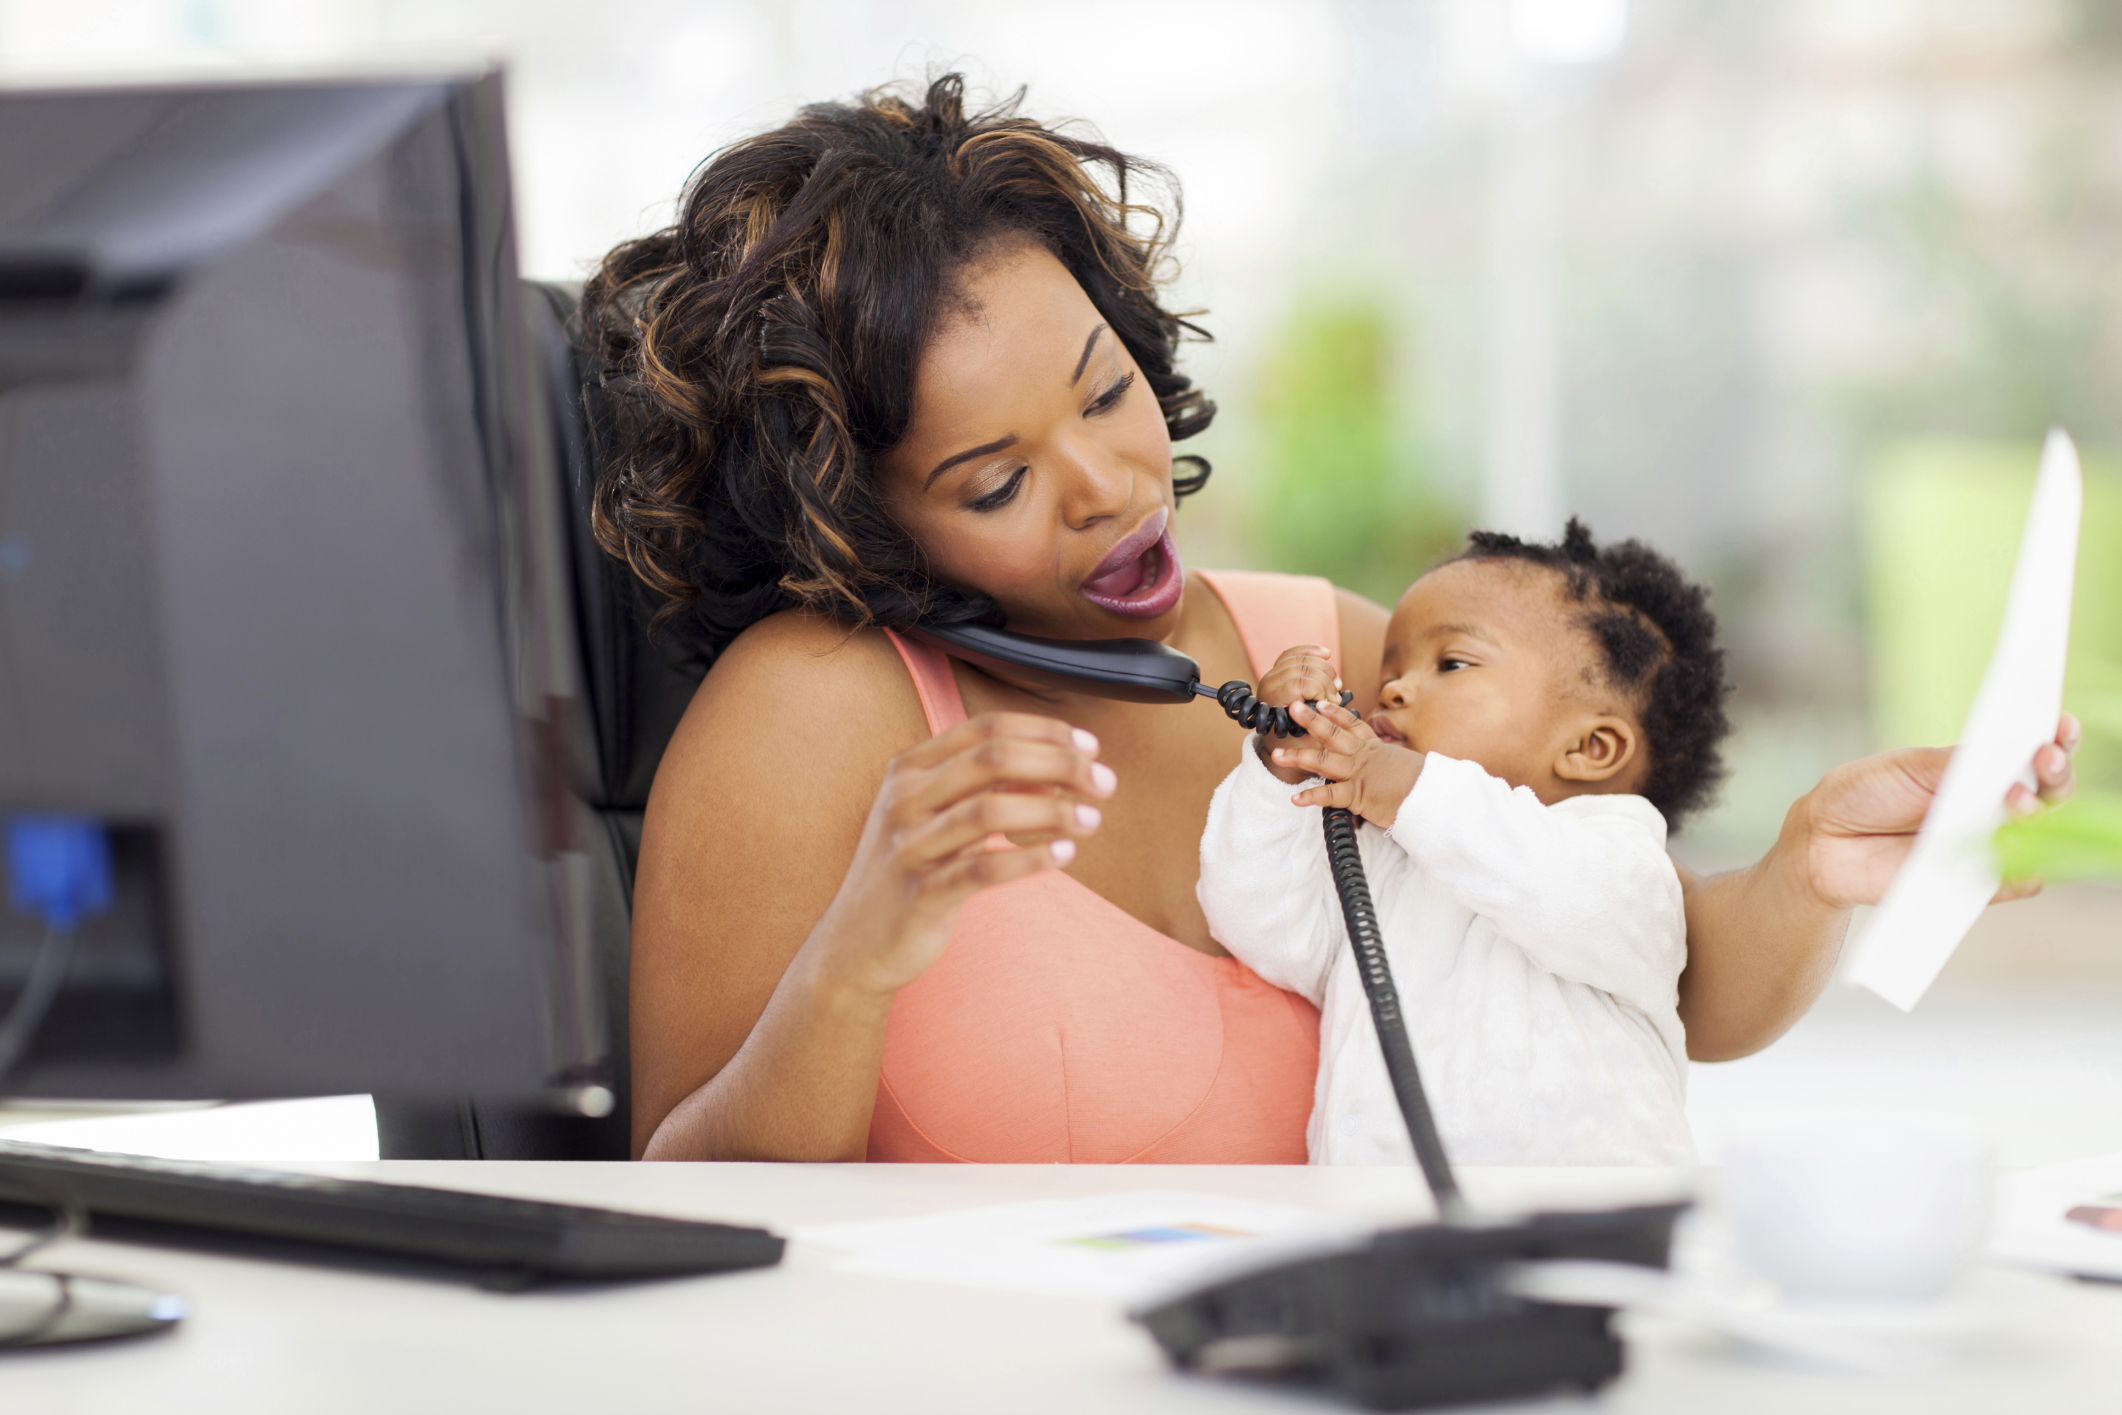 Breastfeeding Tips for Working Moms: Finding the Right Balance | Medela.